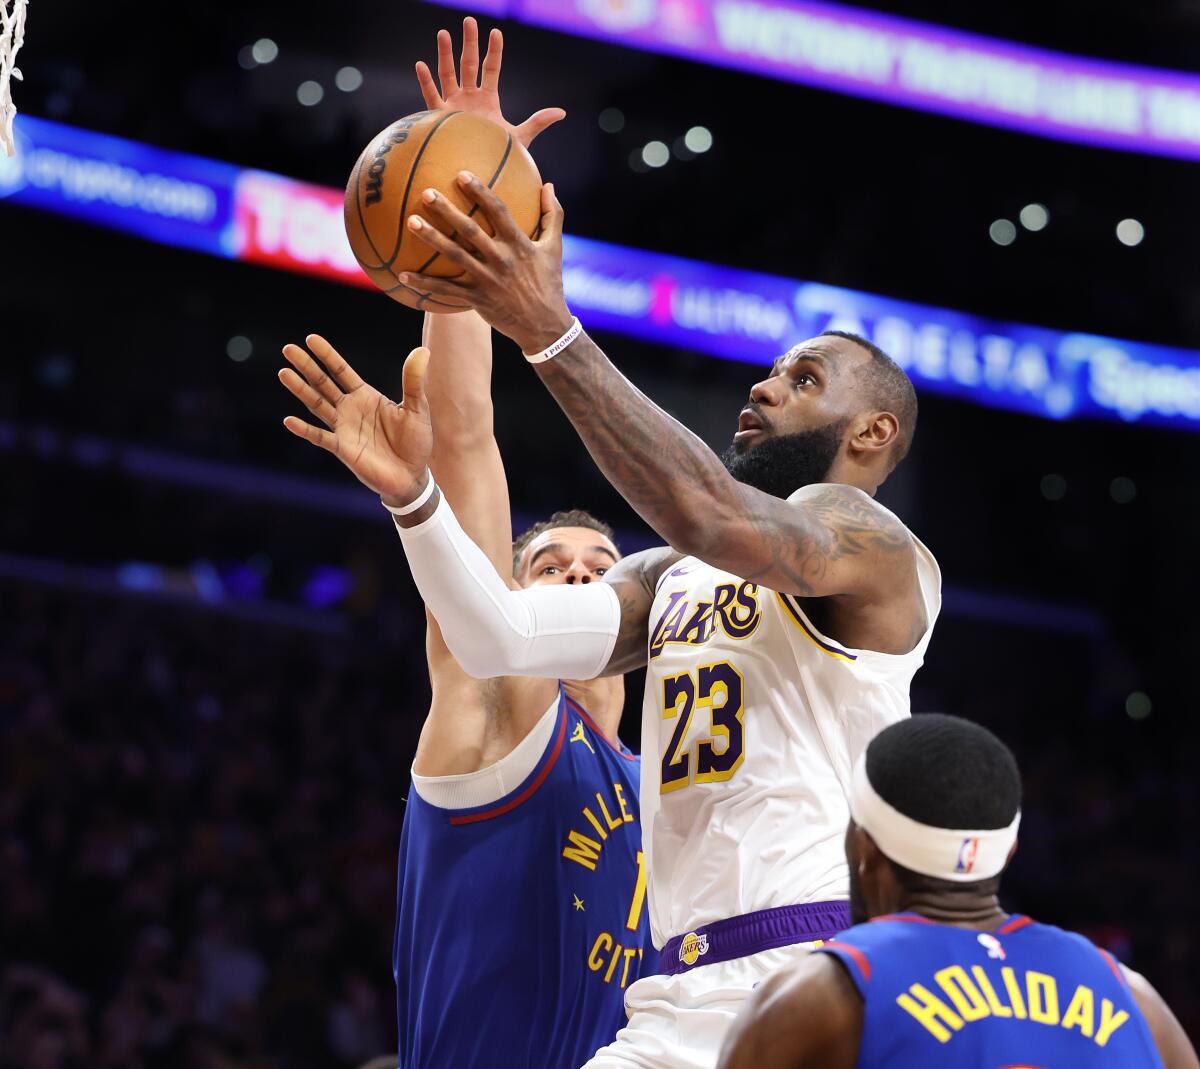 Lakers star LeBron James scores his 40,000th career point during the second quarter Saturday at Crypto.com Arena.